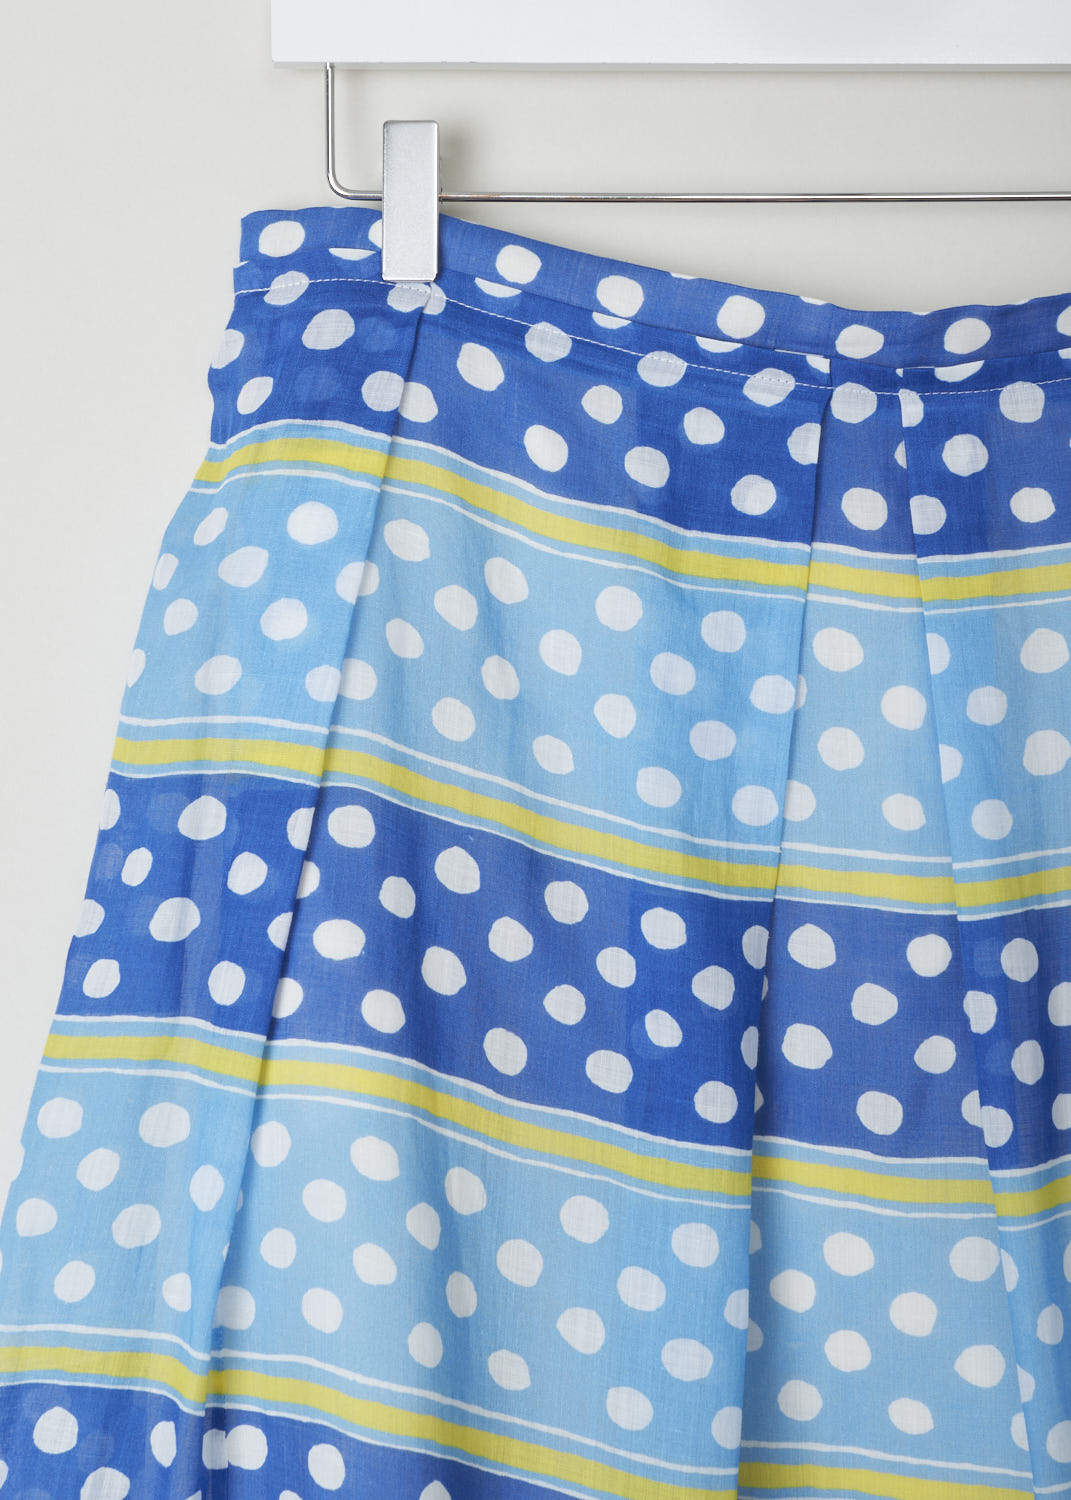 MARNI, COLORFUL DOTS AND STRIPES SKIRT, GOMA0420A0_UTR023_DSB57, Blue, Print, Detail, This colorful dots and stripes midi skirt is pleated throughout. The skirt has a layered hem around the waist with white stitching. In the back the concealed zipper and snap closure can be found.